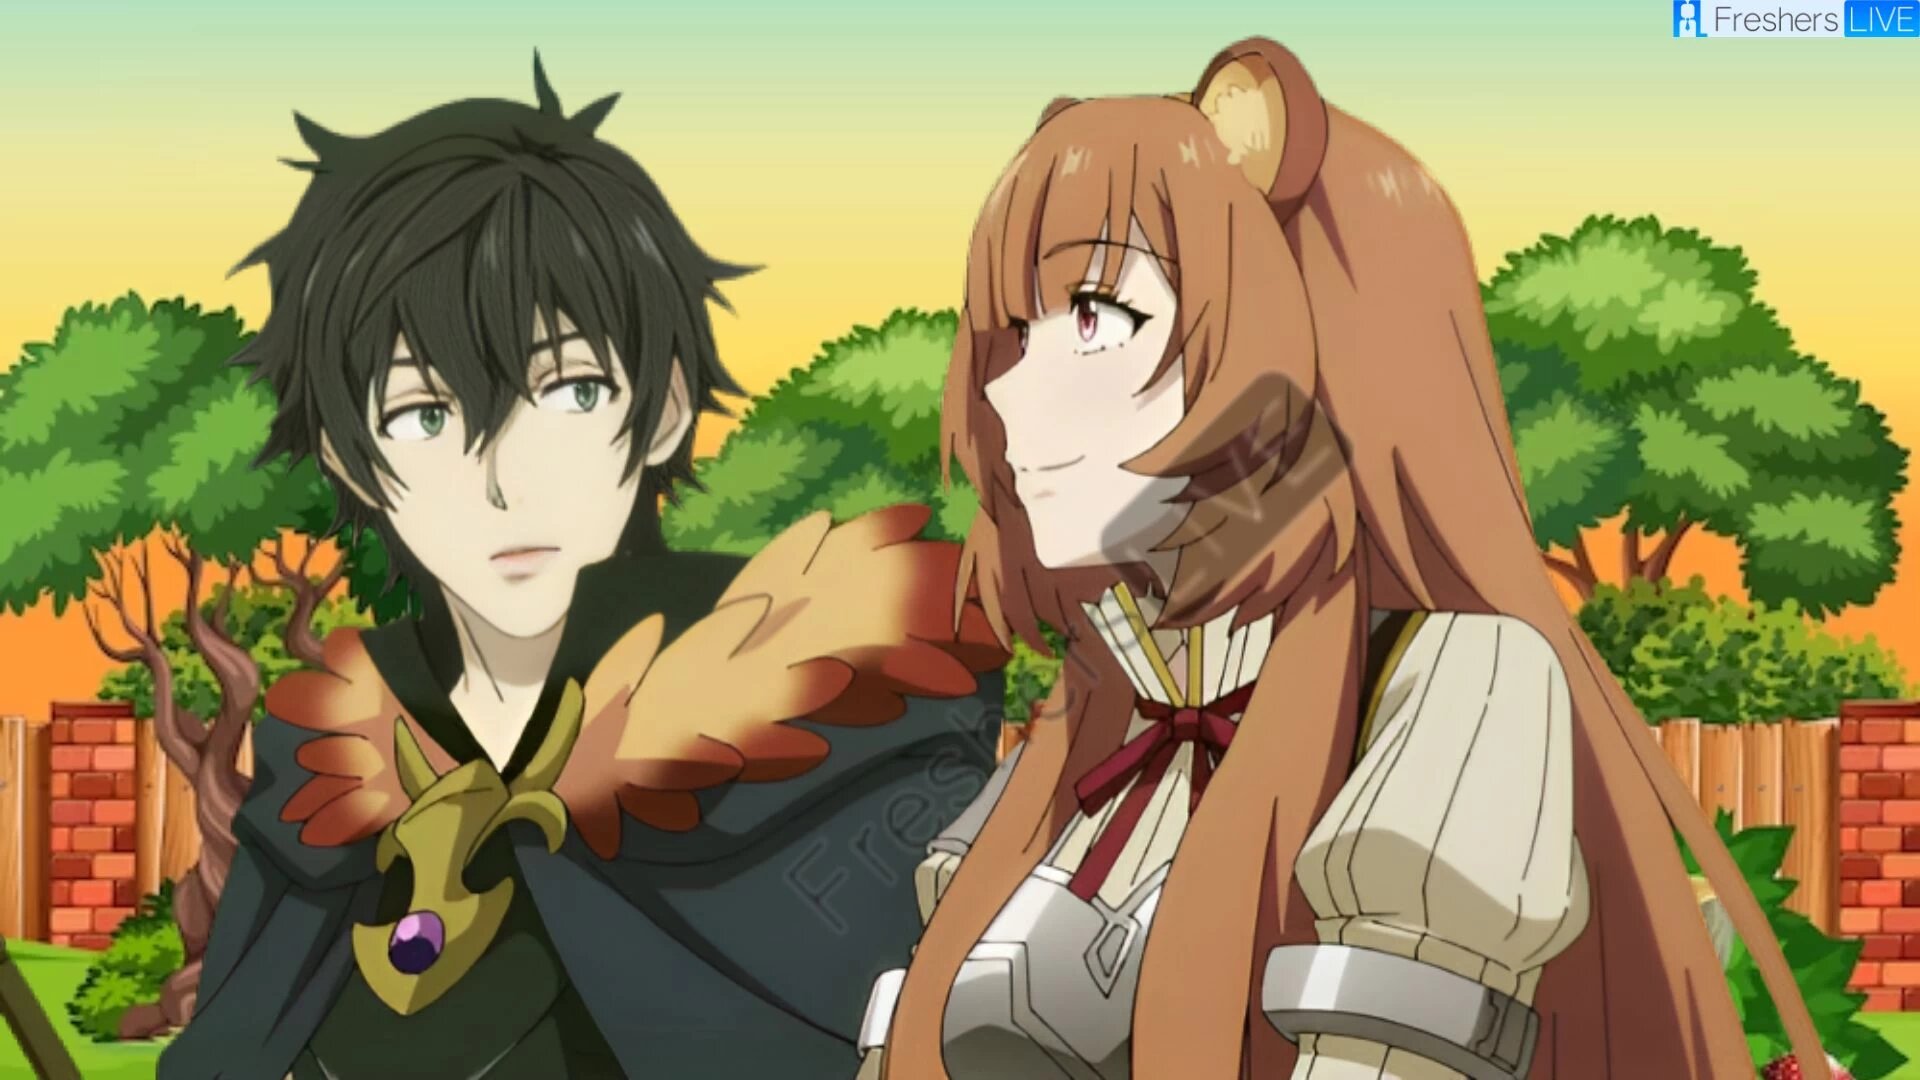 The Rising of the Shield Hero Season 3 updates & the possible